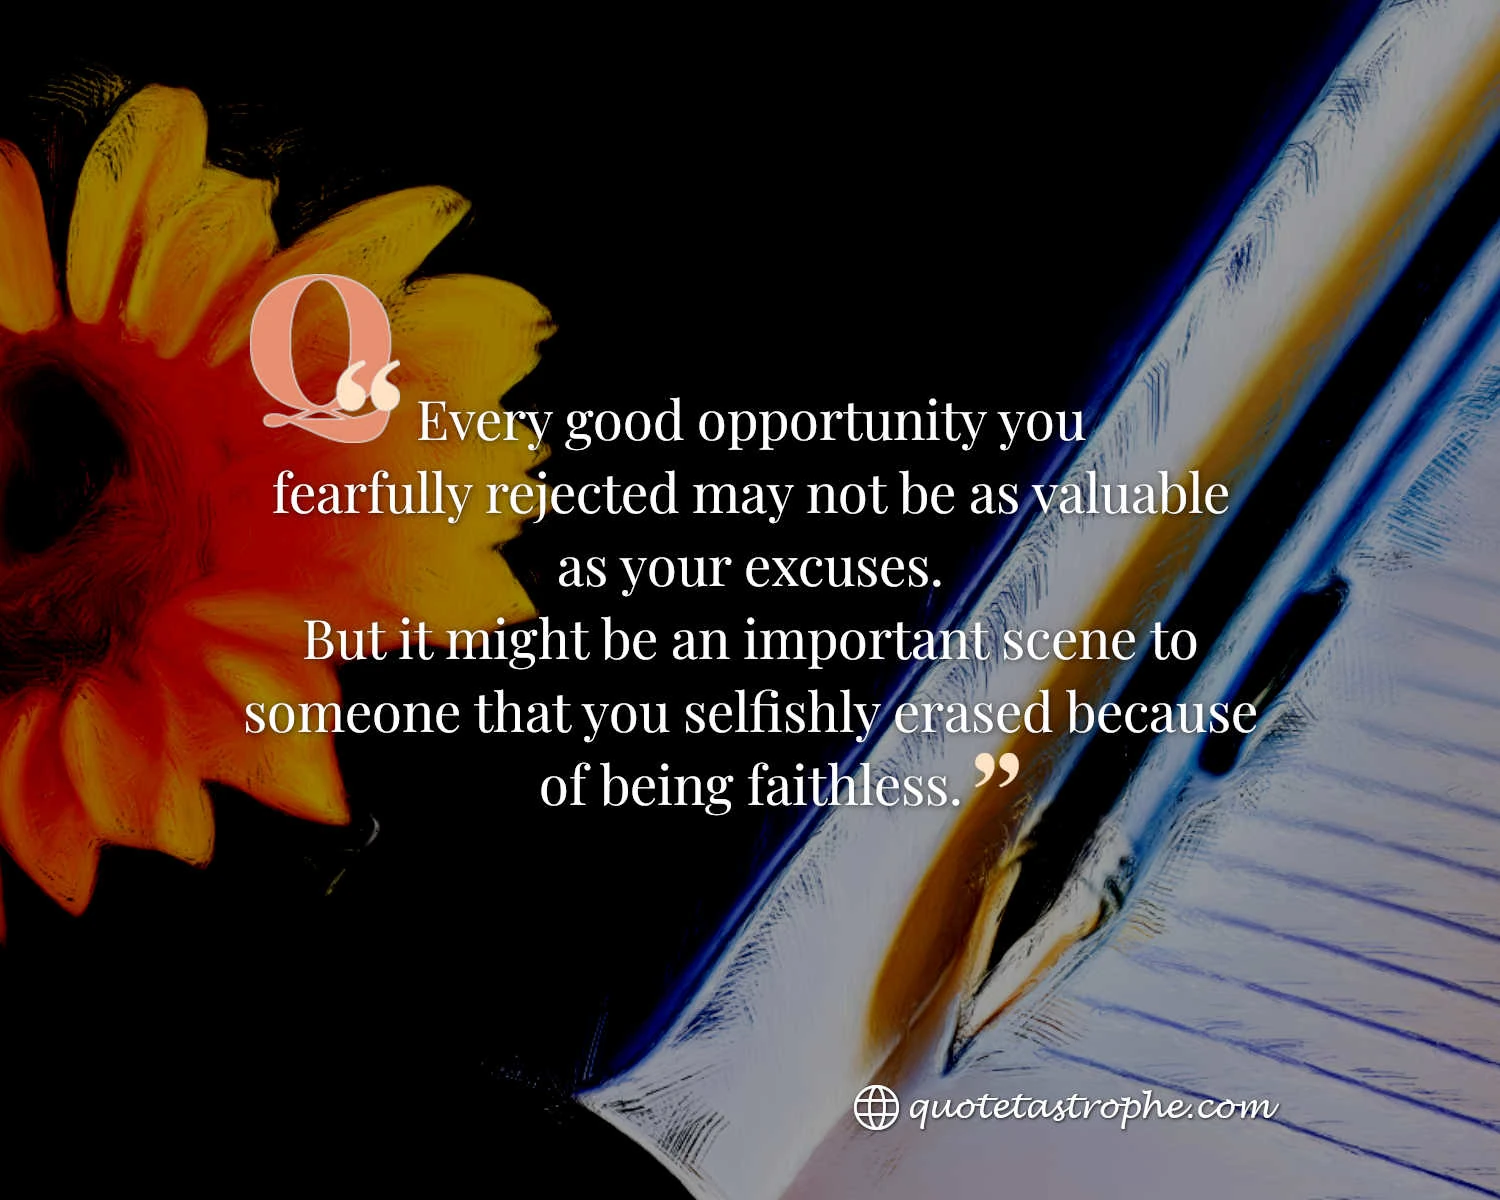 Every Good Opportunity You Fearfully Rejected